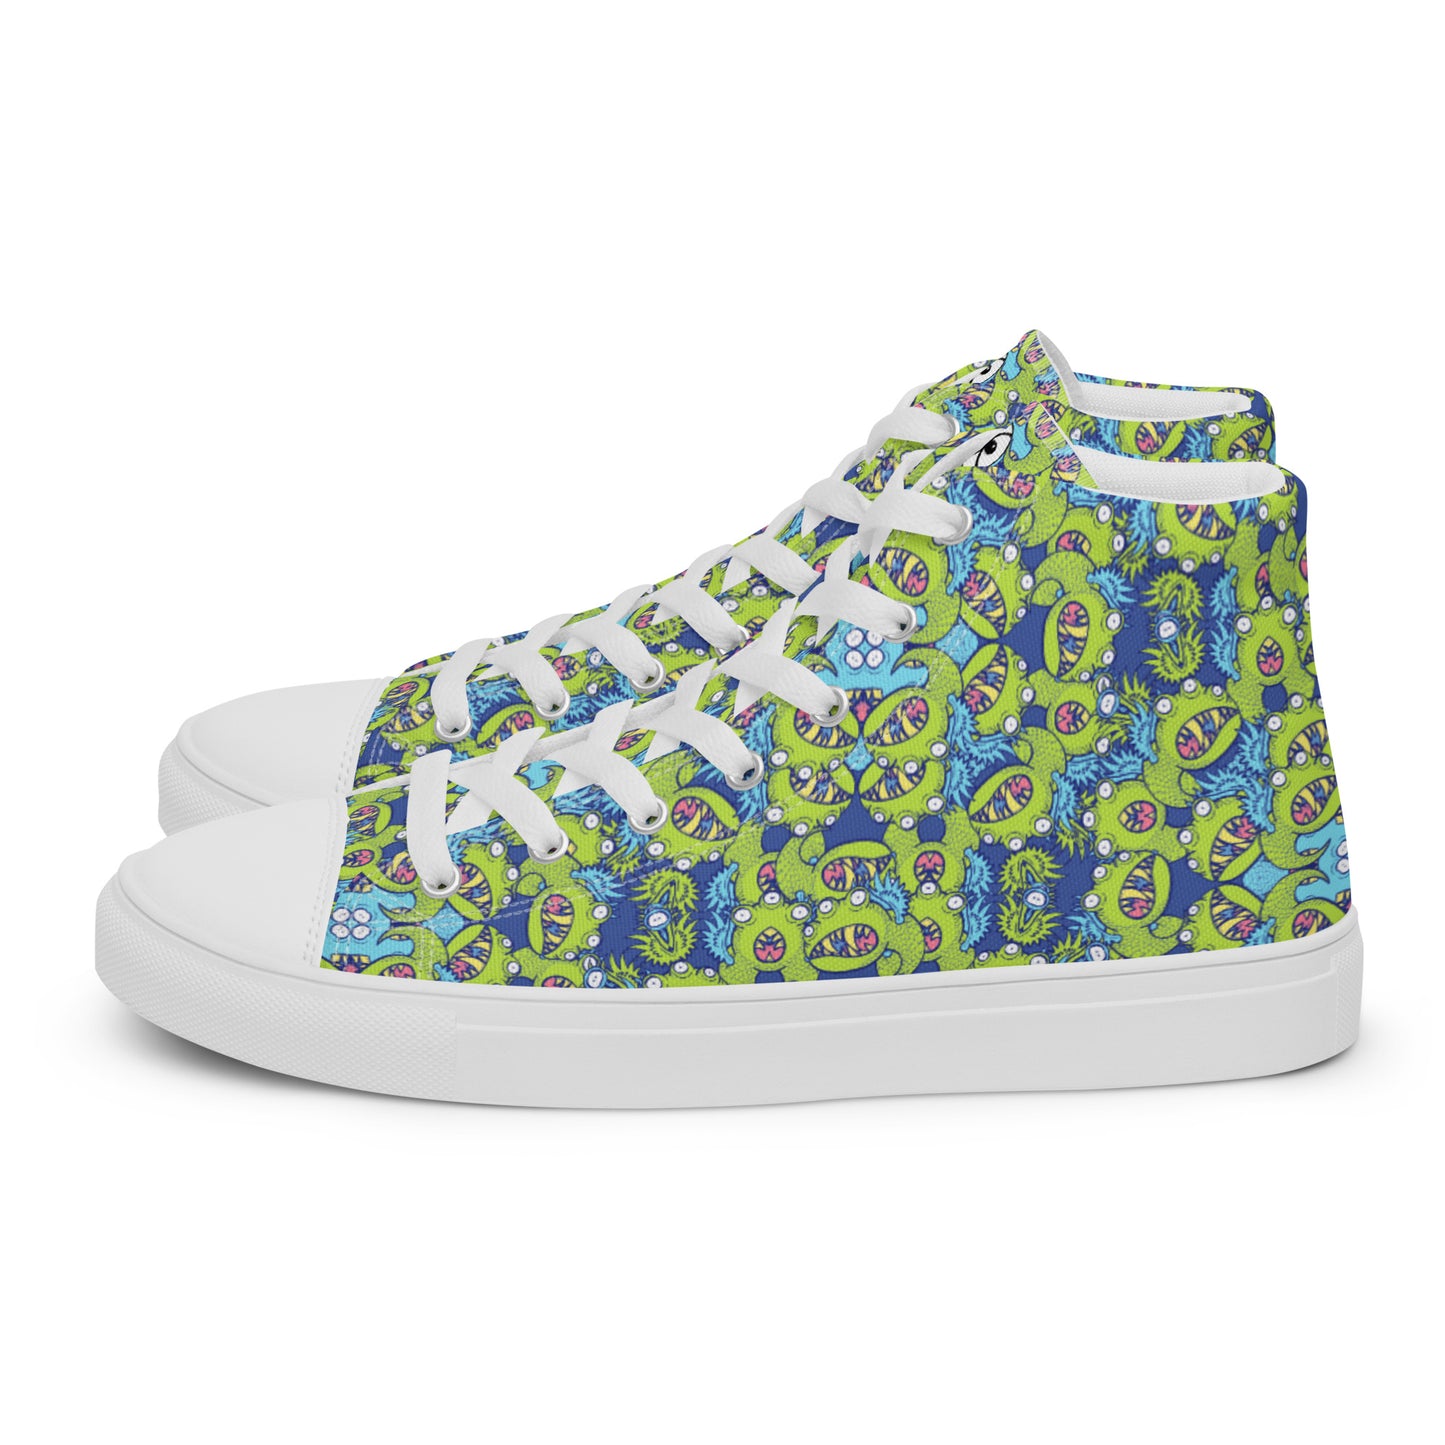 Winged little blue monster pattern art Men’s high top canvas shoes. Side view